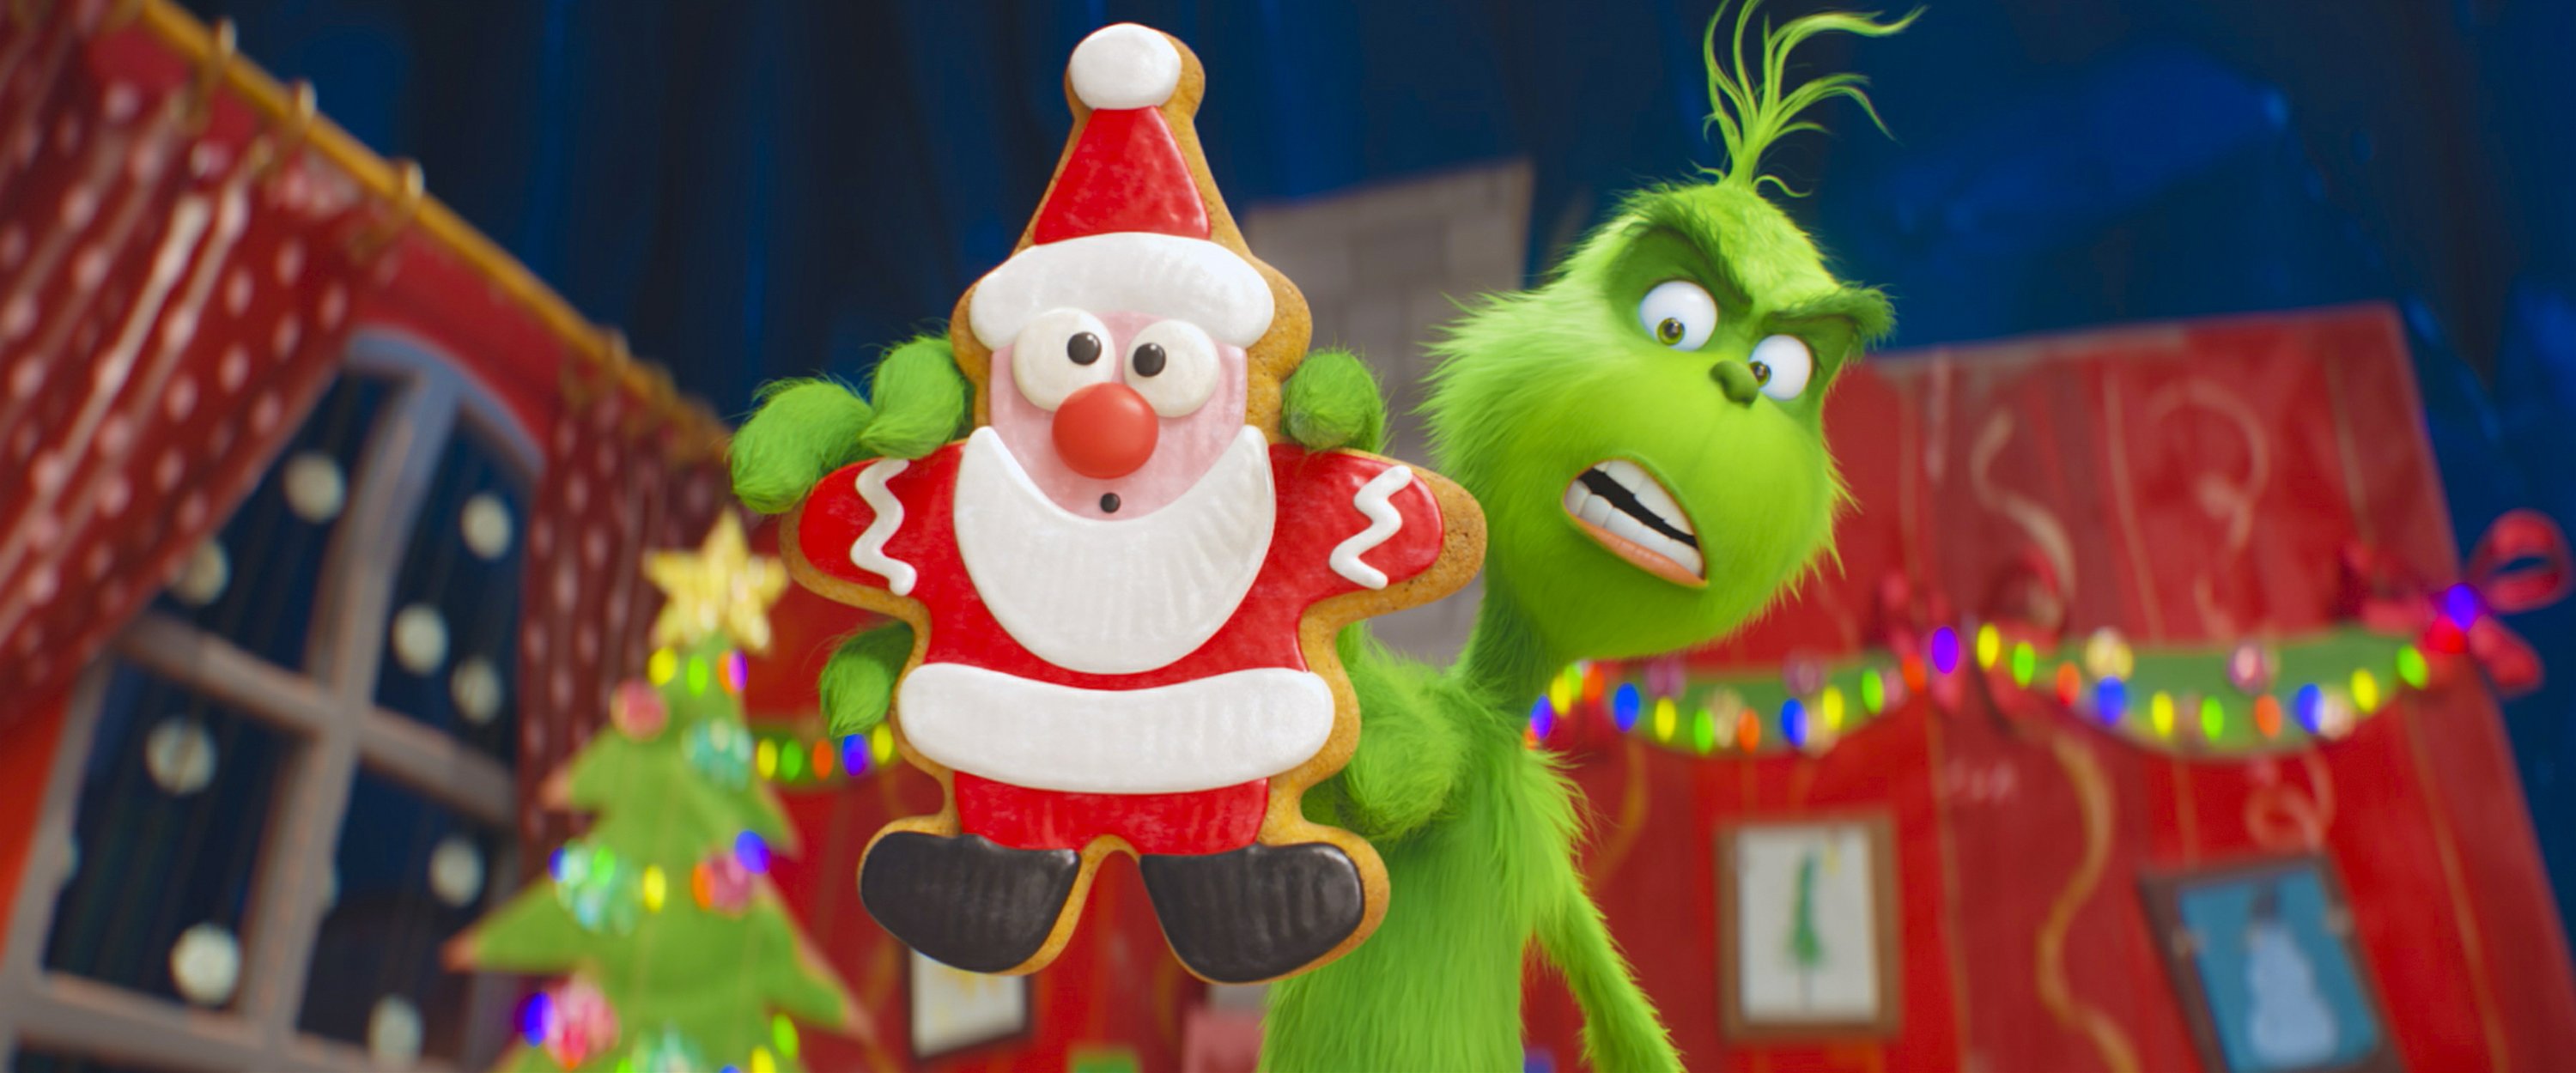 Review This new 'Grinch' film will only make you flinch AP News